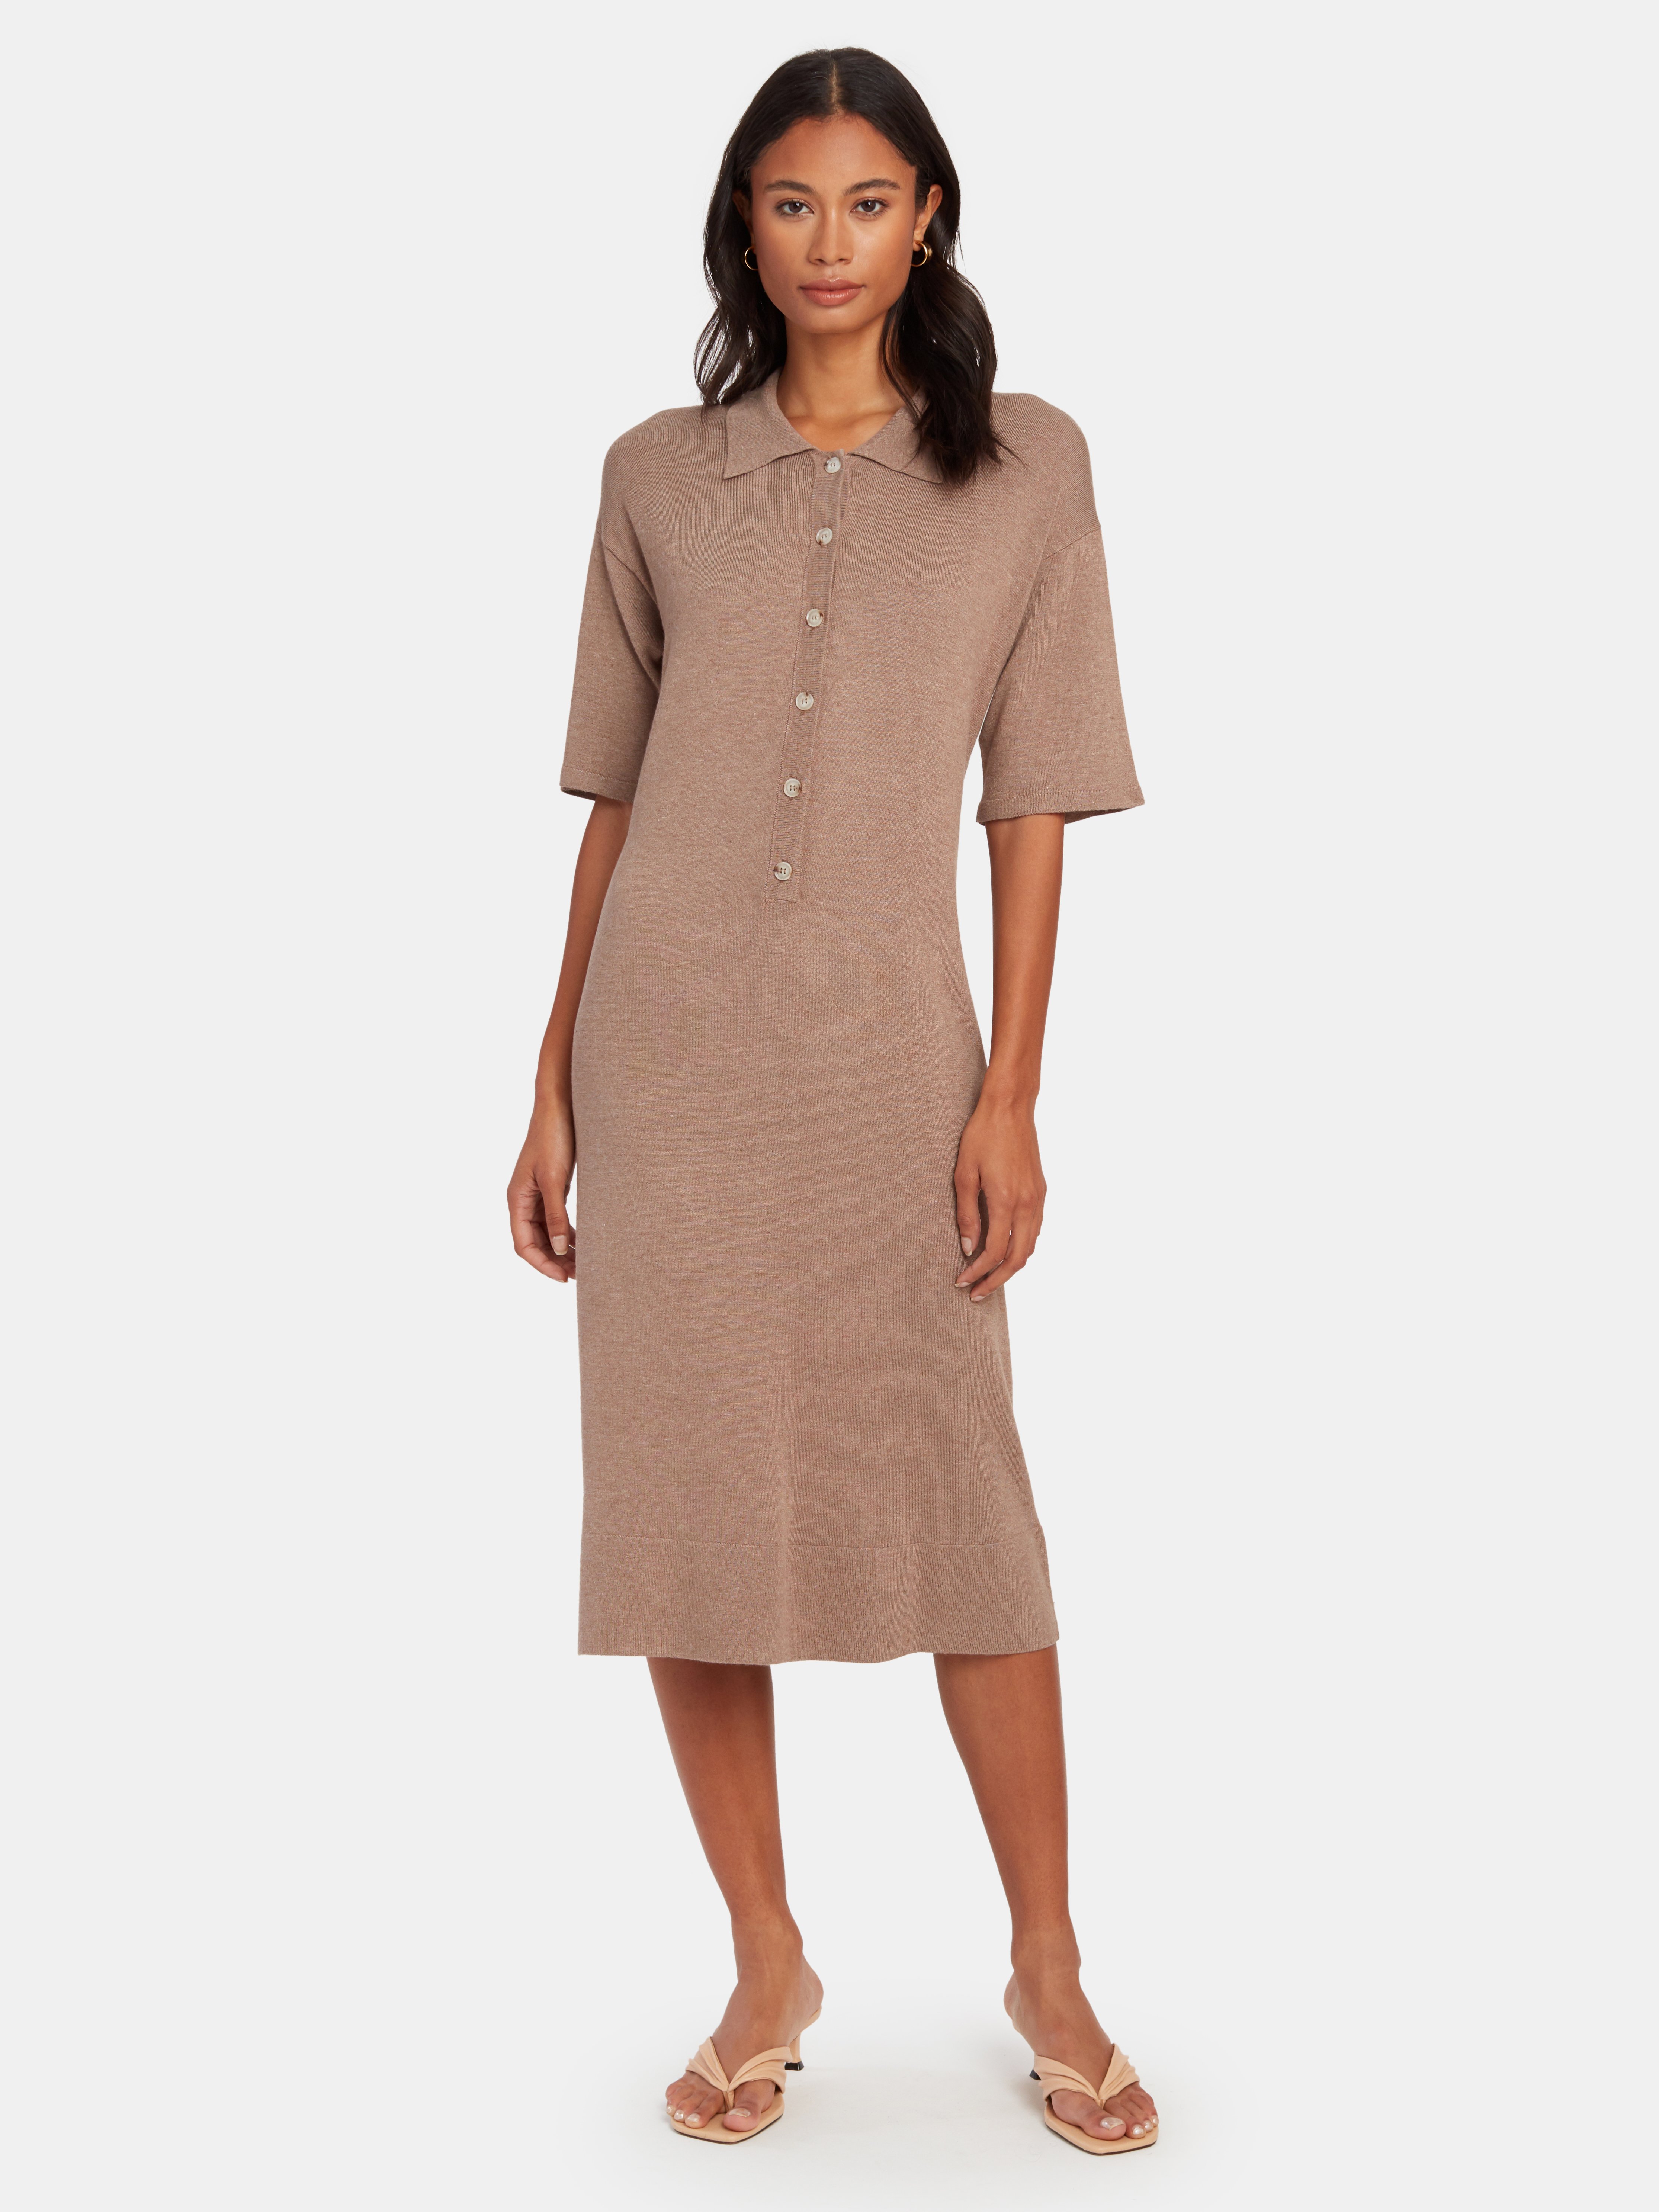 knit midi dresses with sleeves